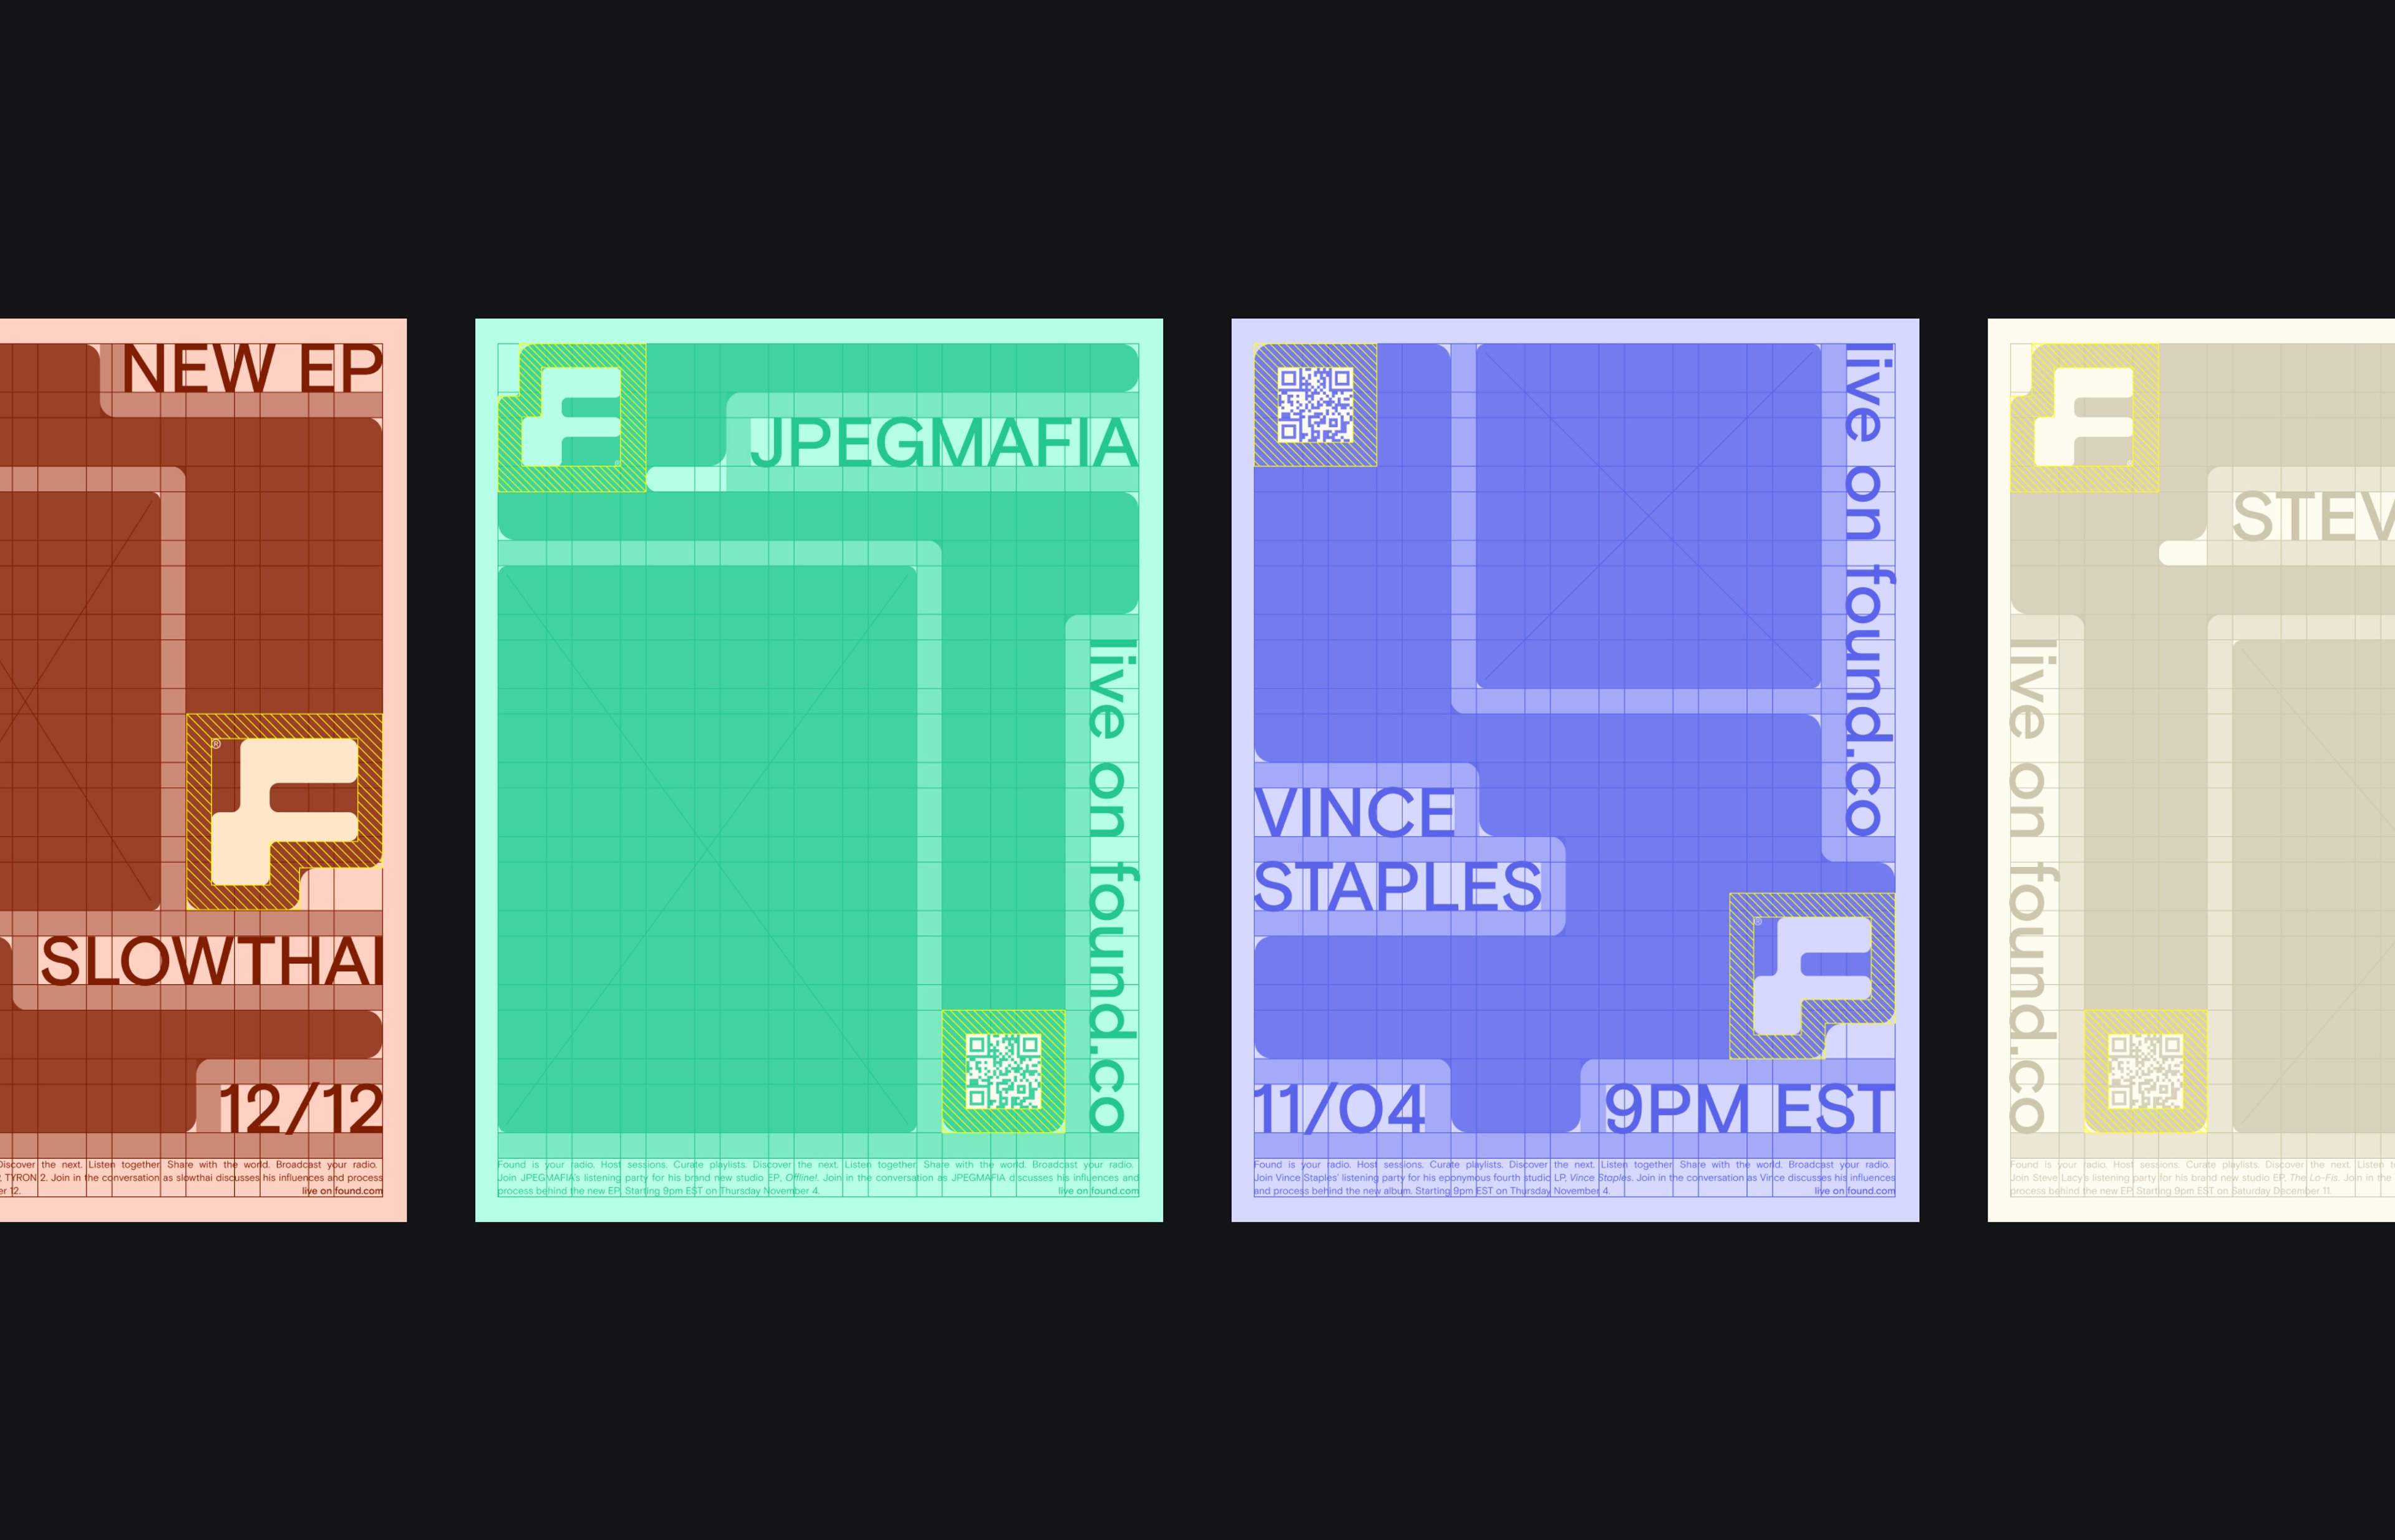 Image of how the Found posters are constructed showing the layout and grid